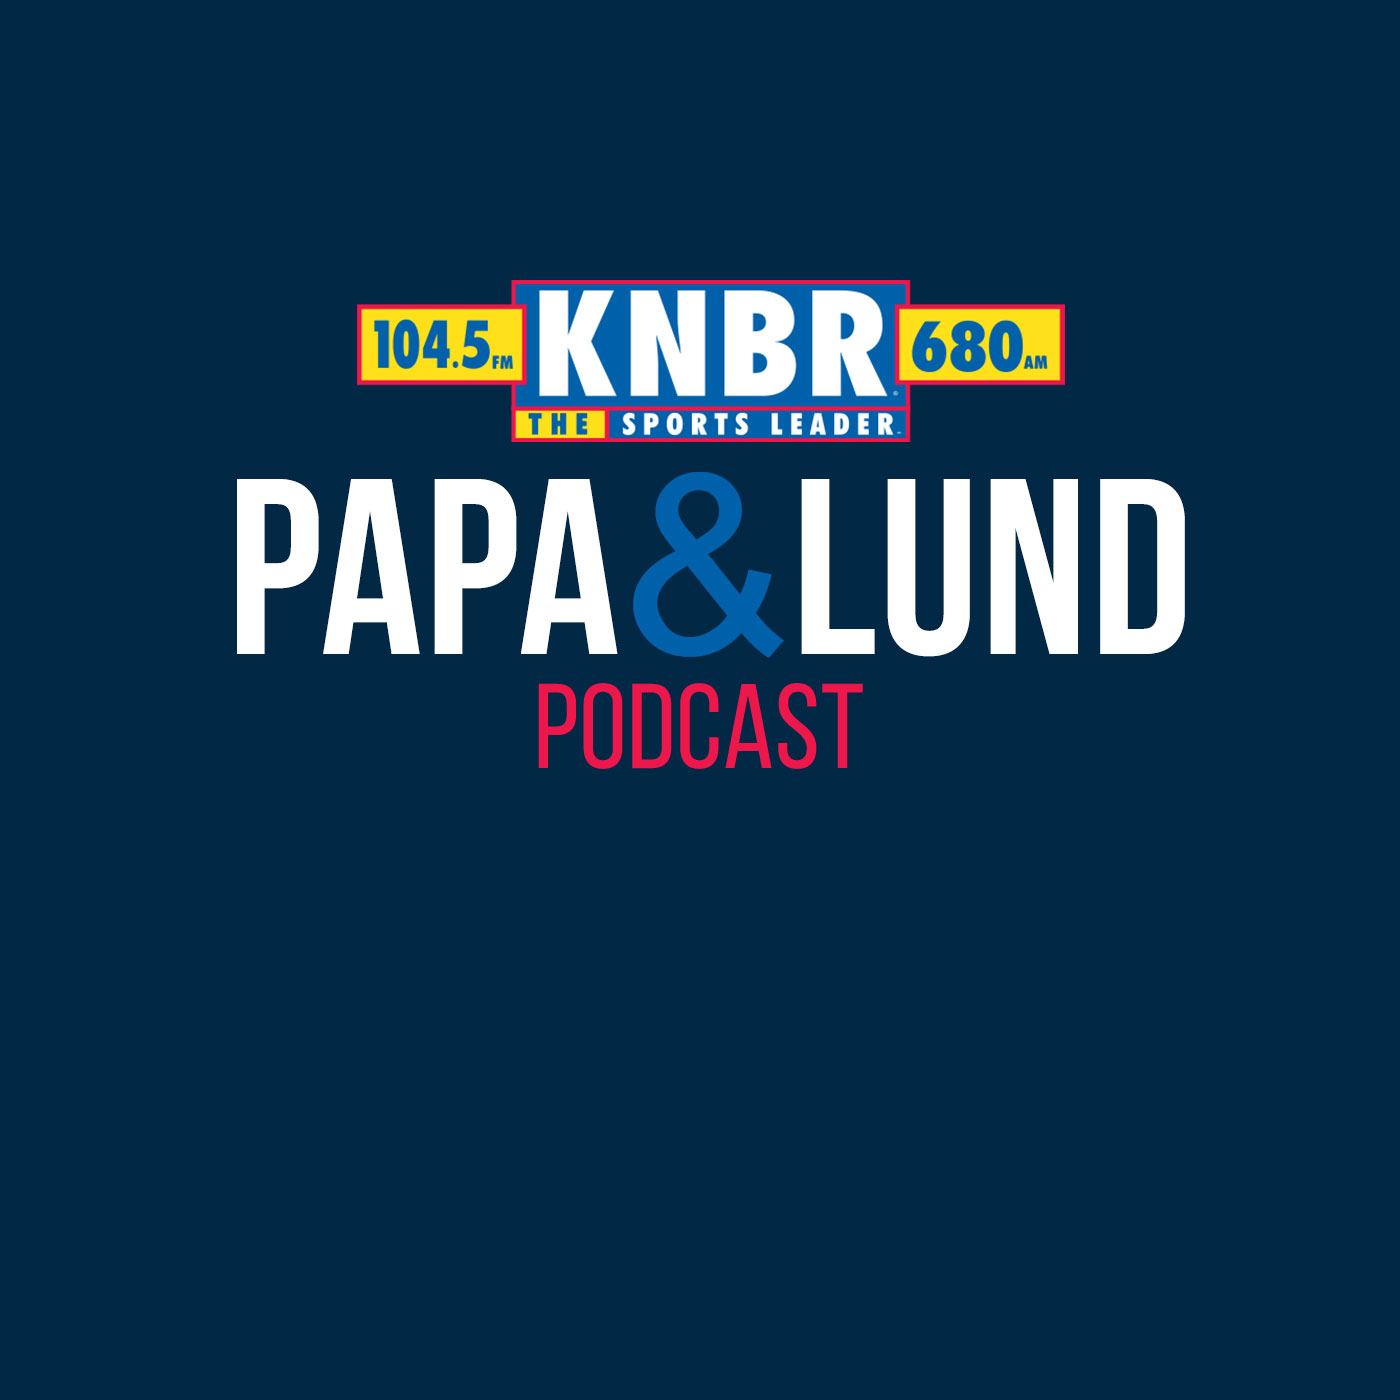 11-3 Dave Flemming joins Papa & Lund after calling a combined No Hitter in the World Series and how that compares to calling Matt Cain's Perfect Game